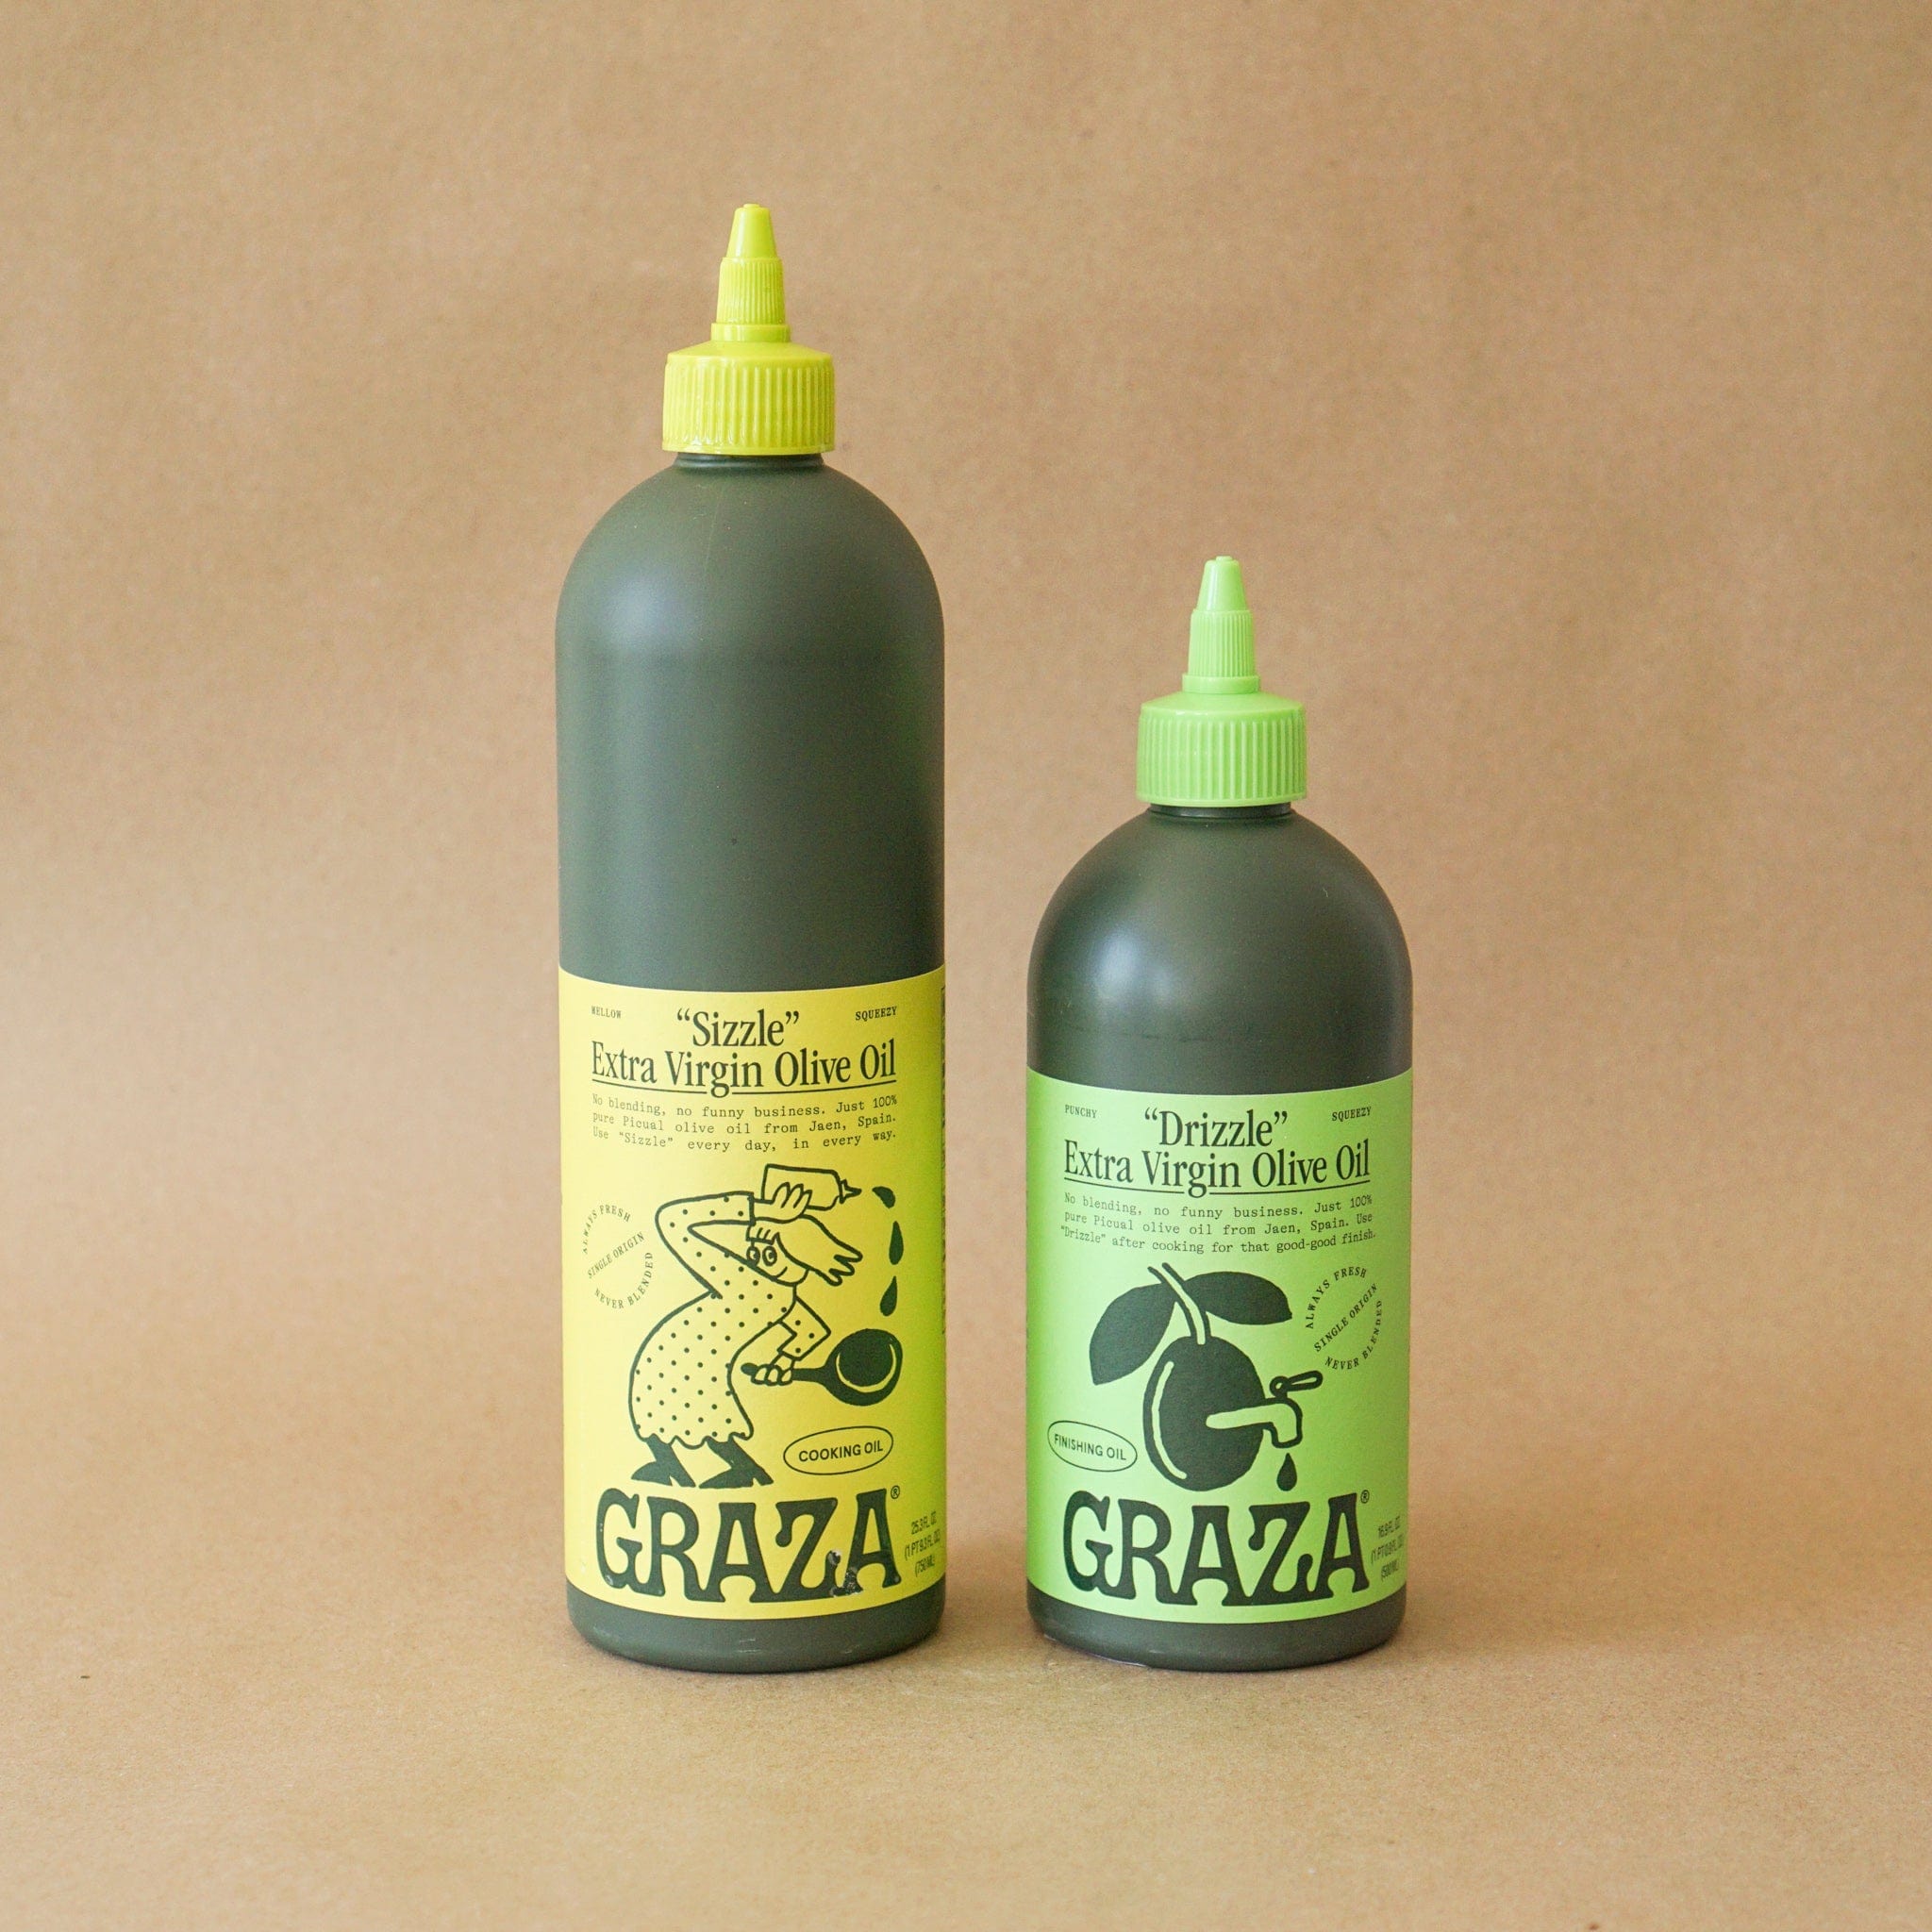 Drizzle” & “Sizzle” Olive Oil